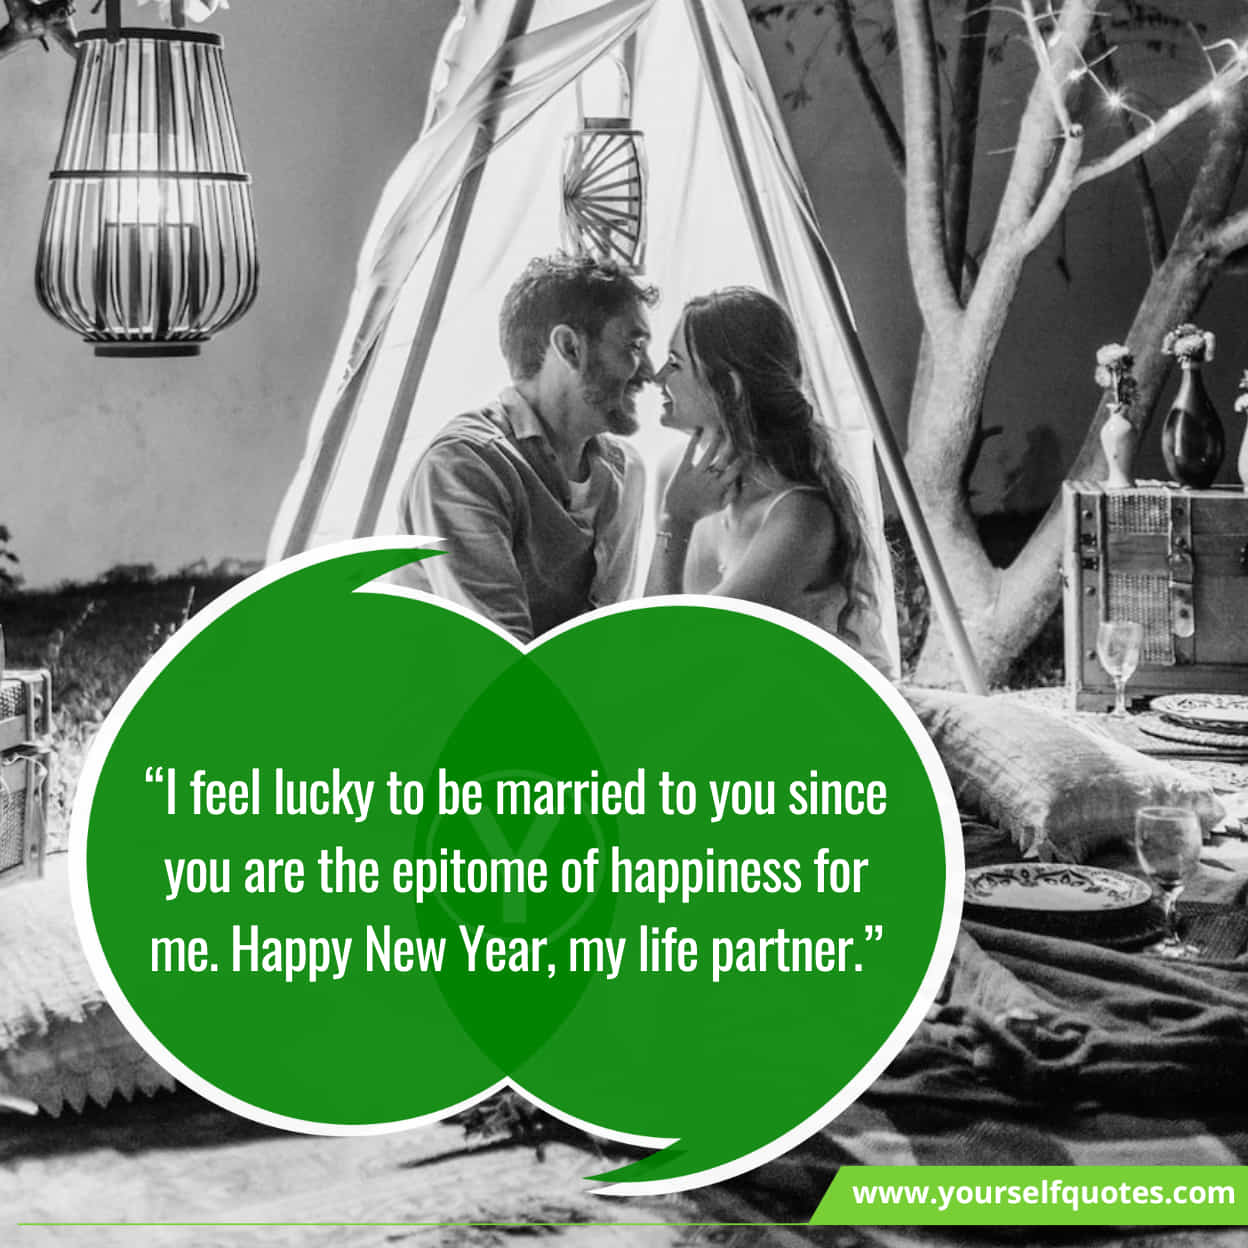 Best Lovely New Year Wishes For Husband and Wife 